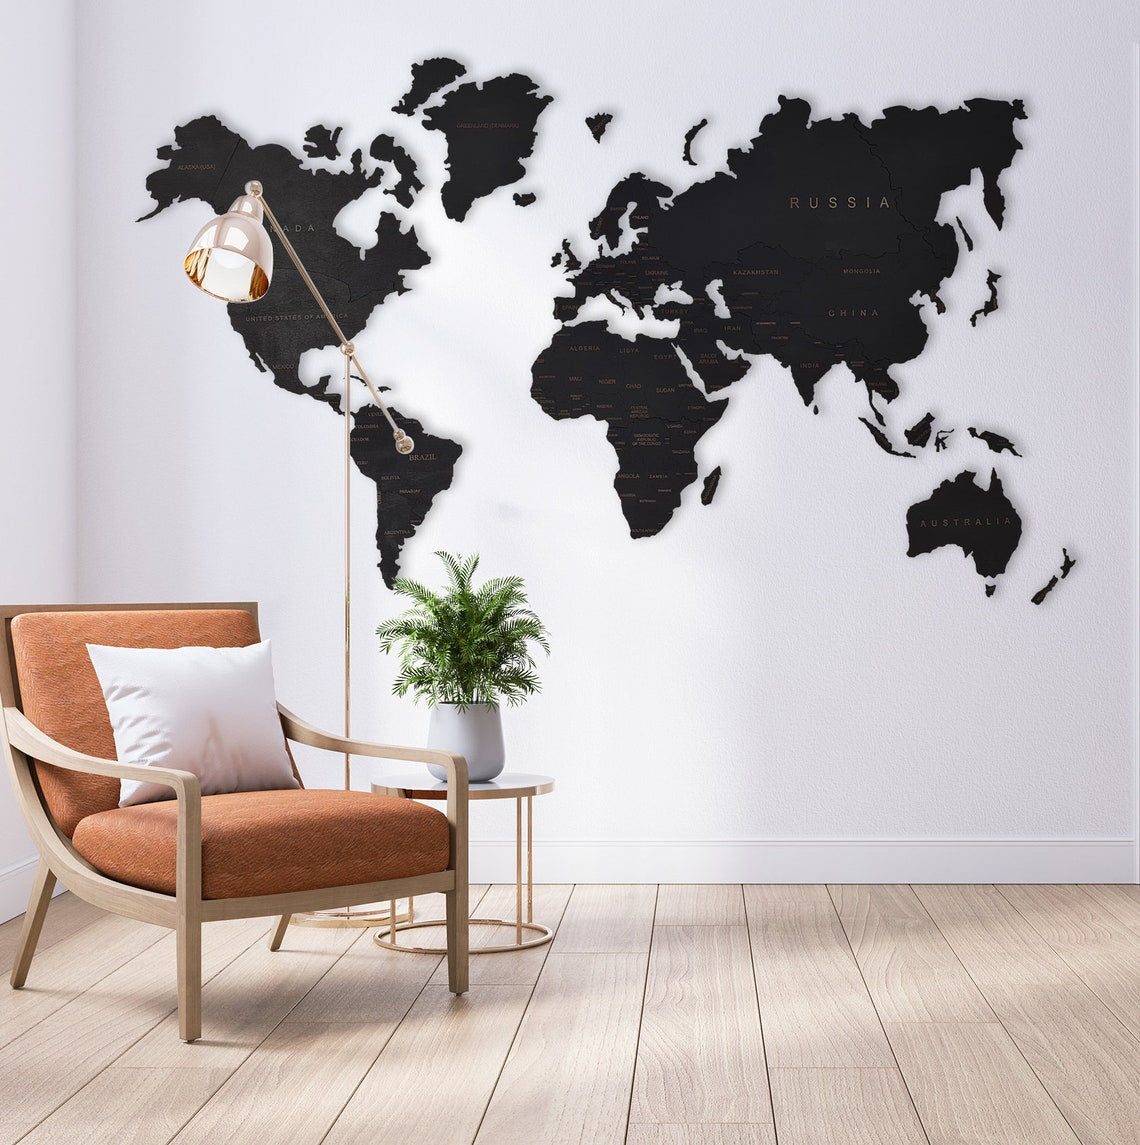 Wooden World Map Rustic Wall Art Home Decor Large Travel Map Wood Gift